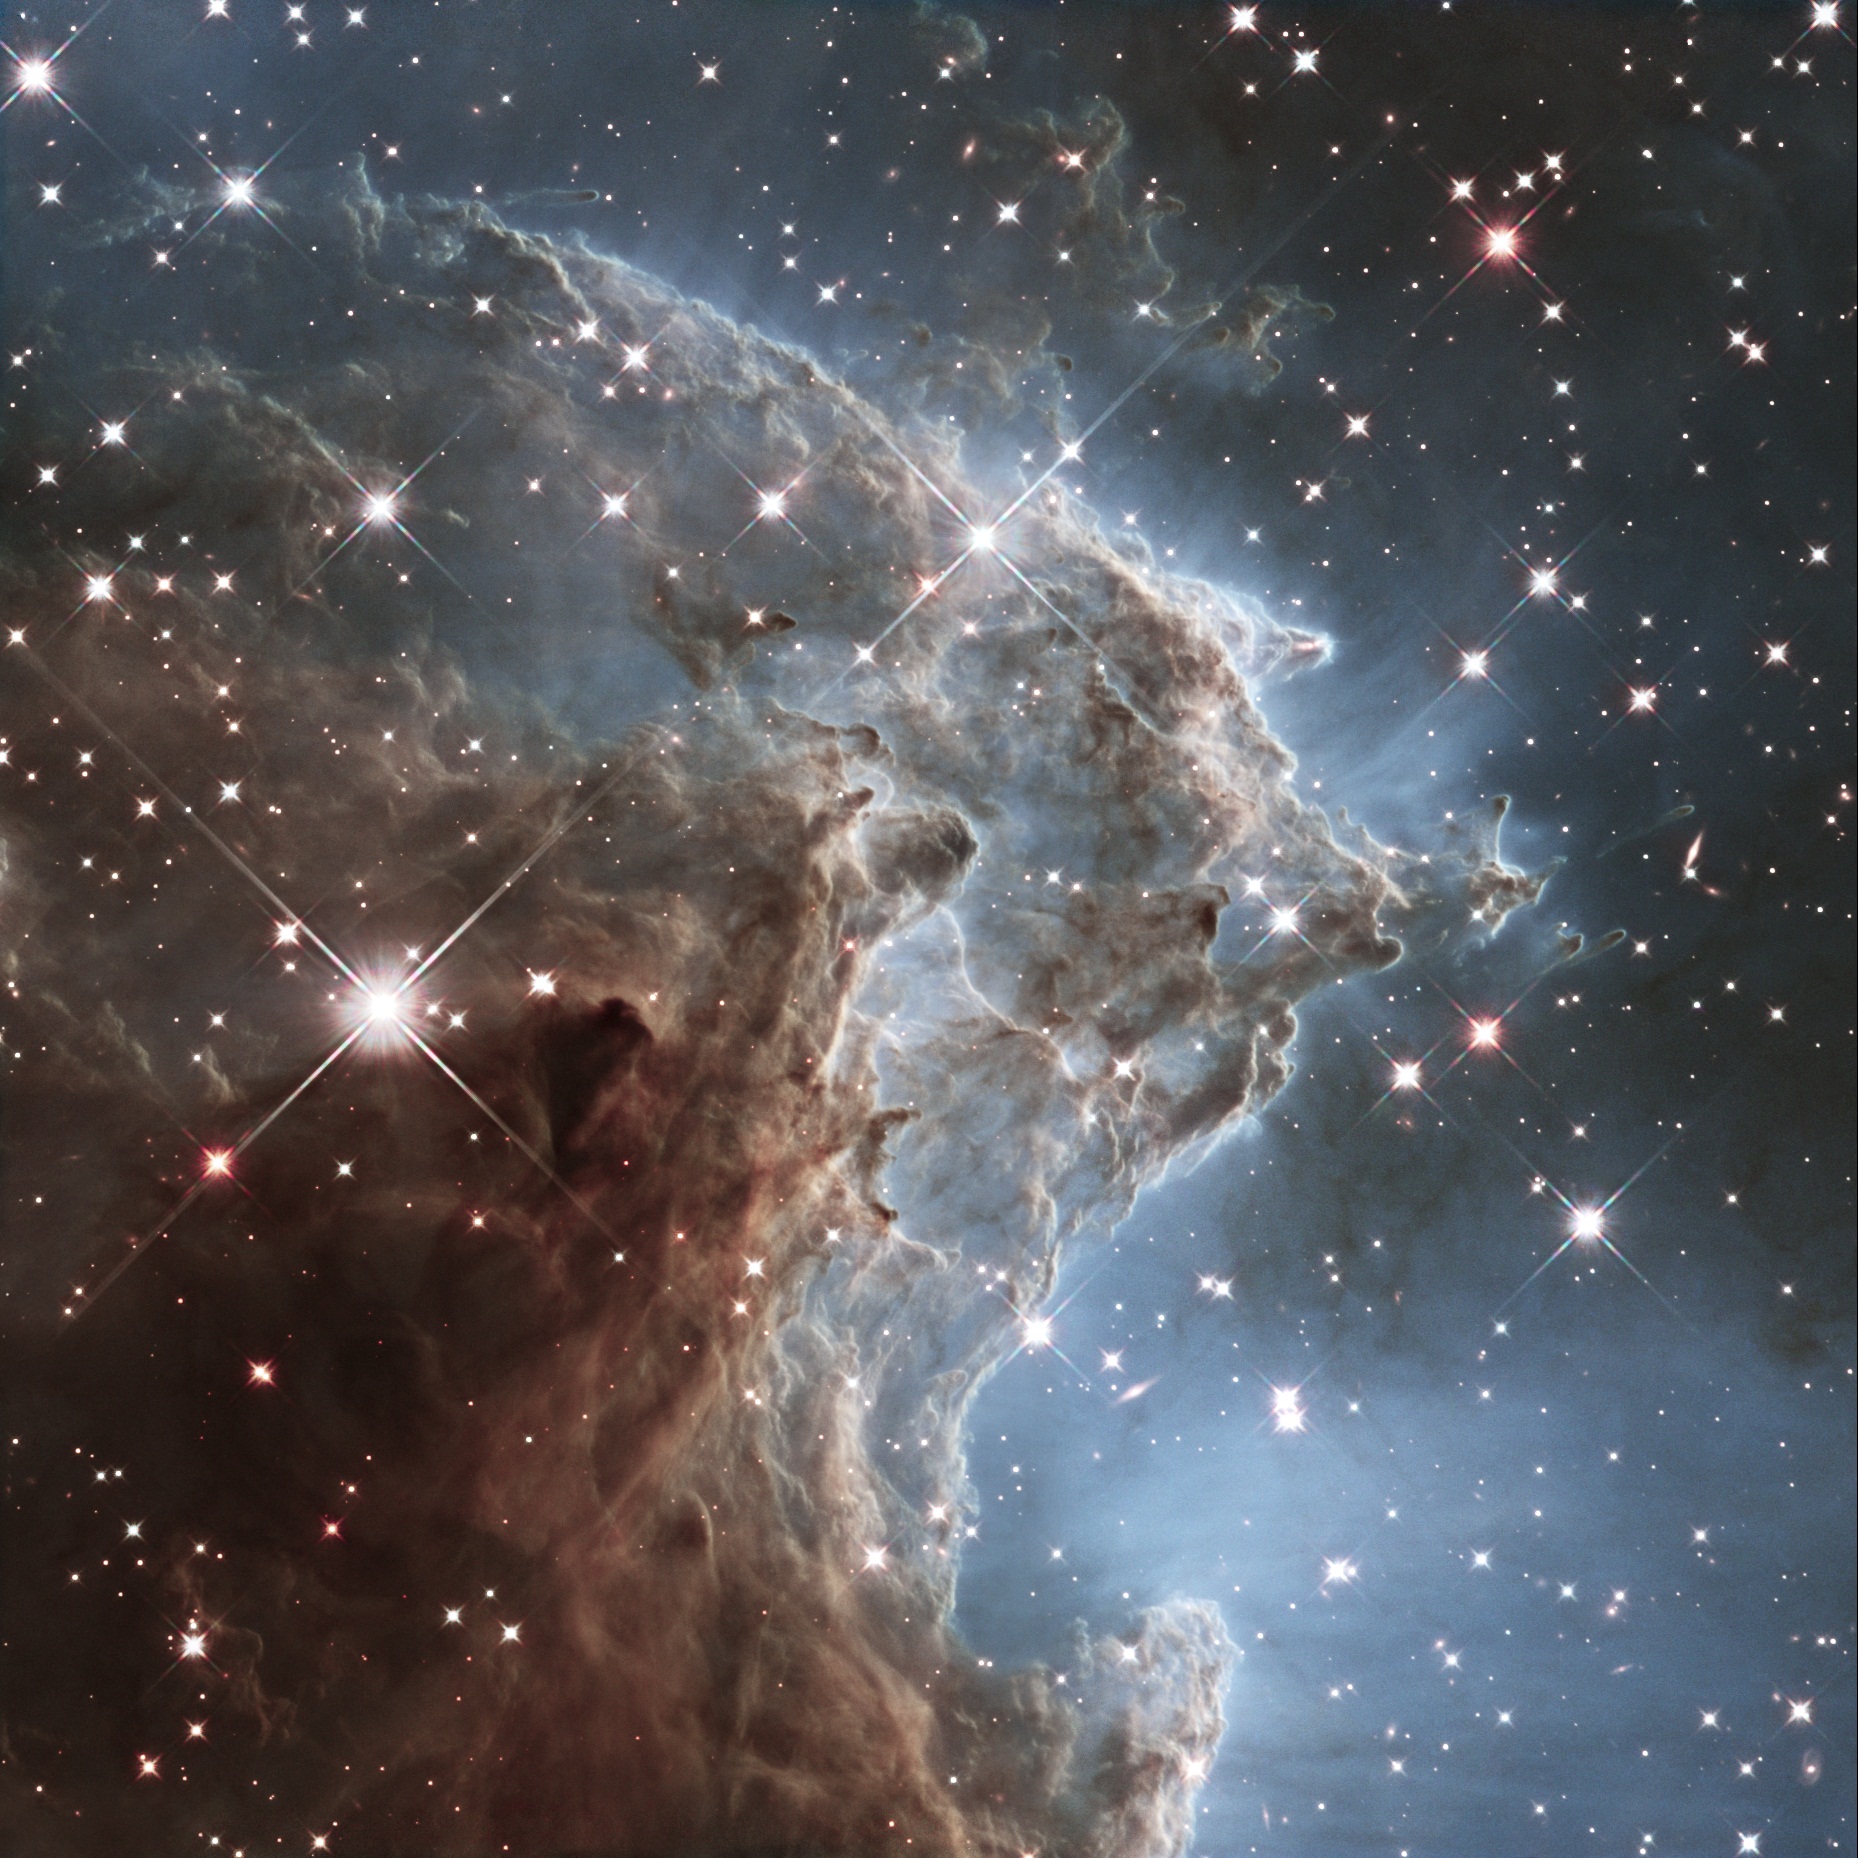 Hubble’s 24th birthday shot of Monkey Head Nebula. This cloud of gas and dust lies about 6400 light-years away in the constellation of Orion. Nebulas like this one are popular targets for Hubble – their colorful plumes of gas and fiery bright stars create ethereally beautiful pictures.